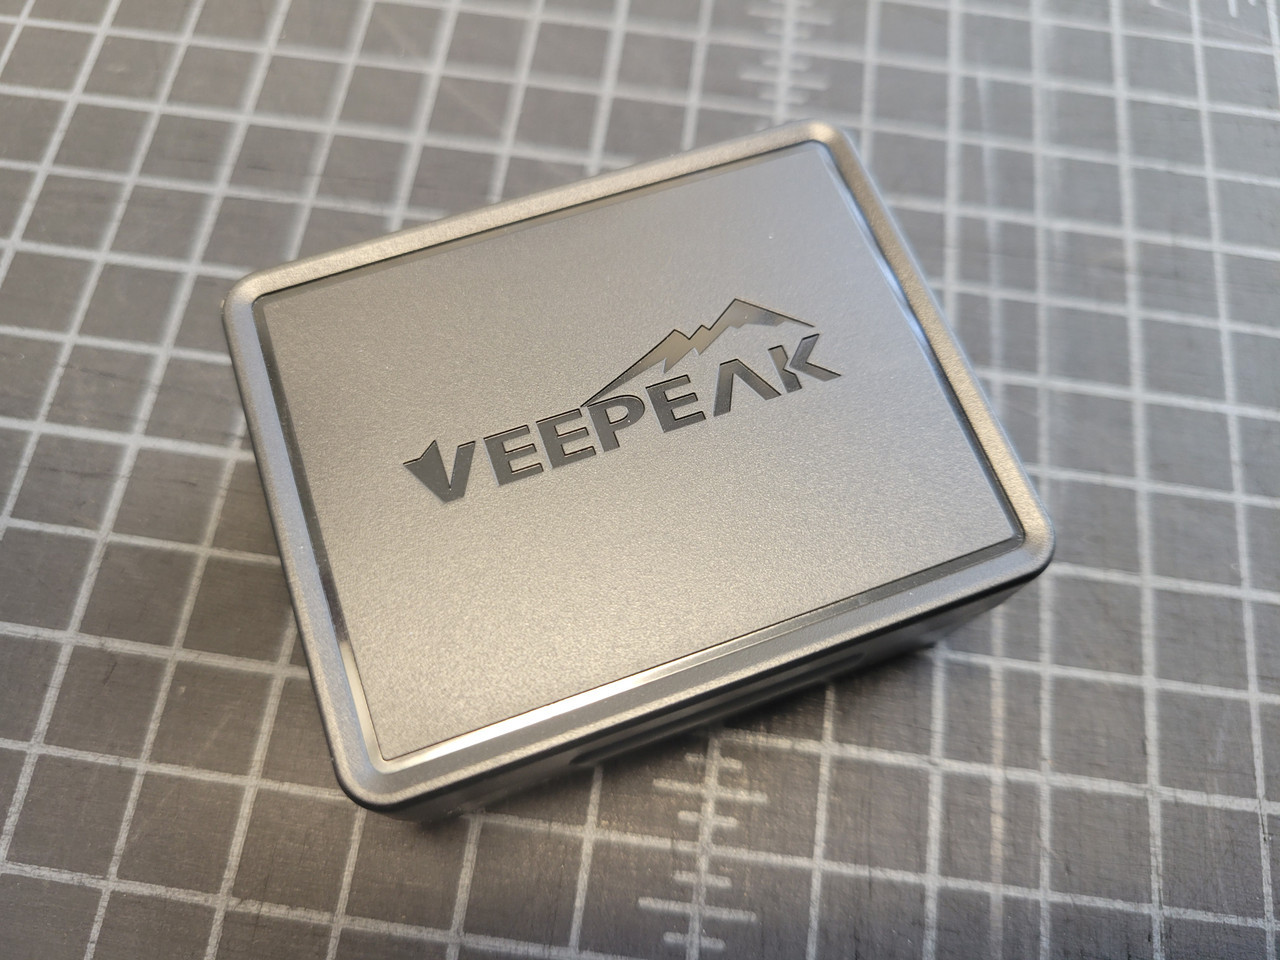 VeePeak Bluetooth OBDII Diagnostic Tool with the included case